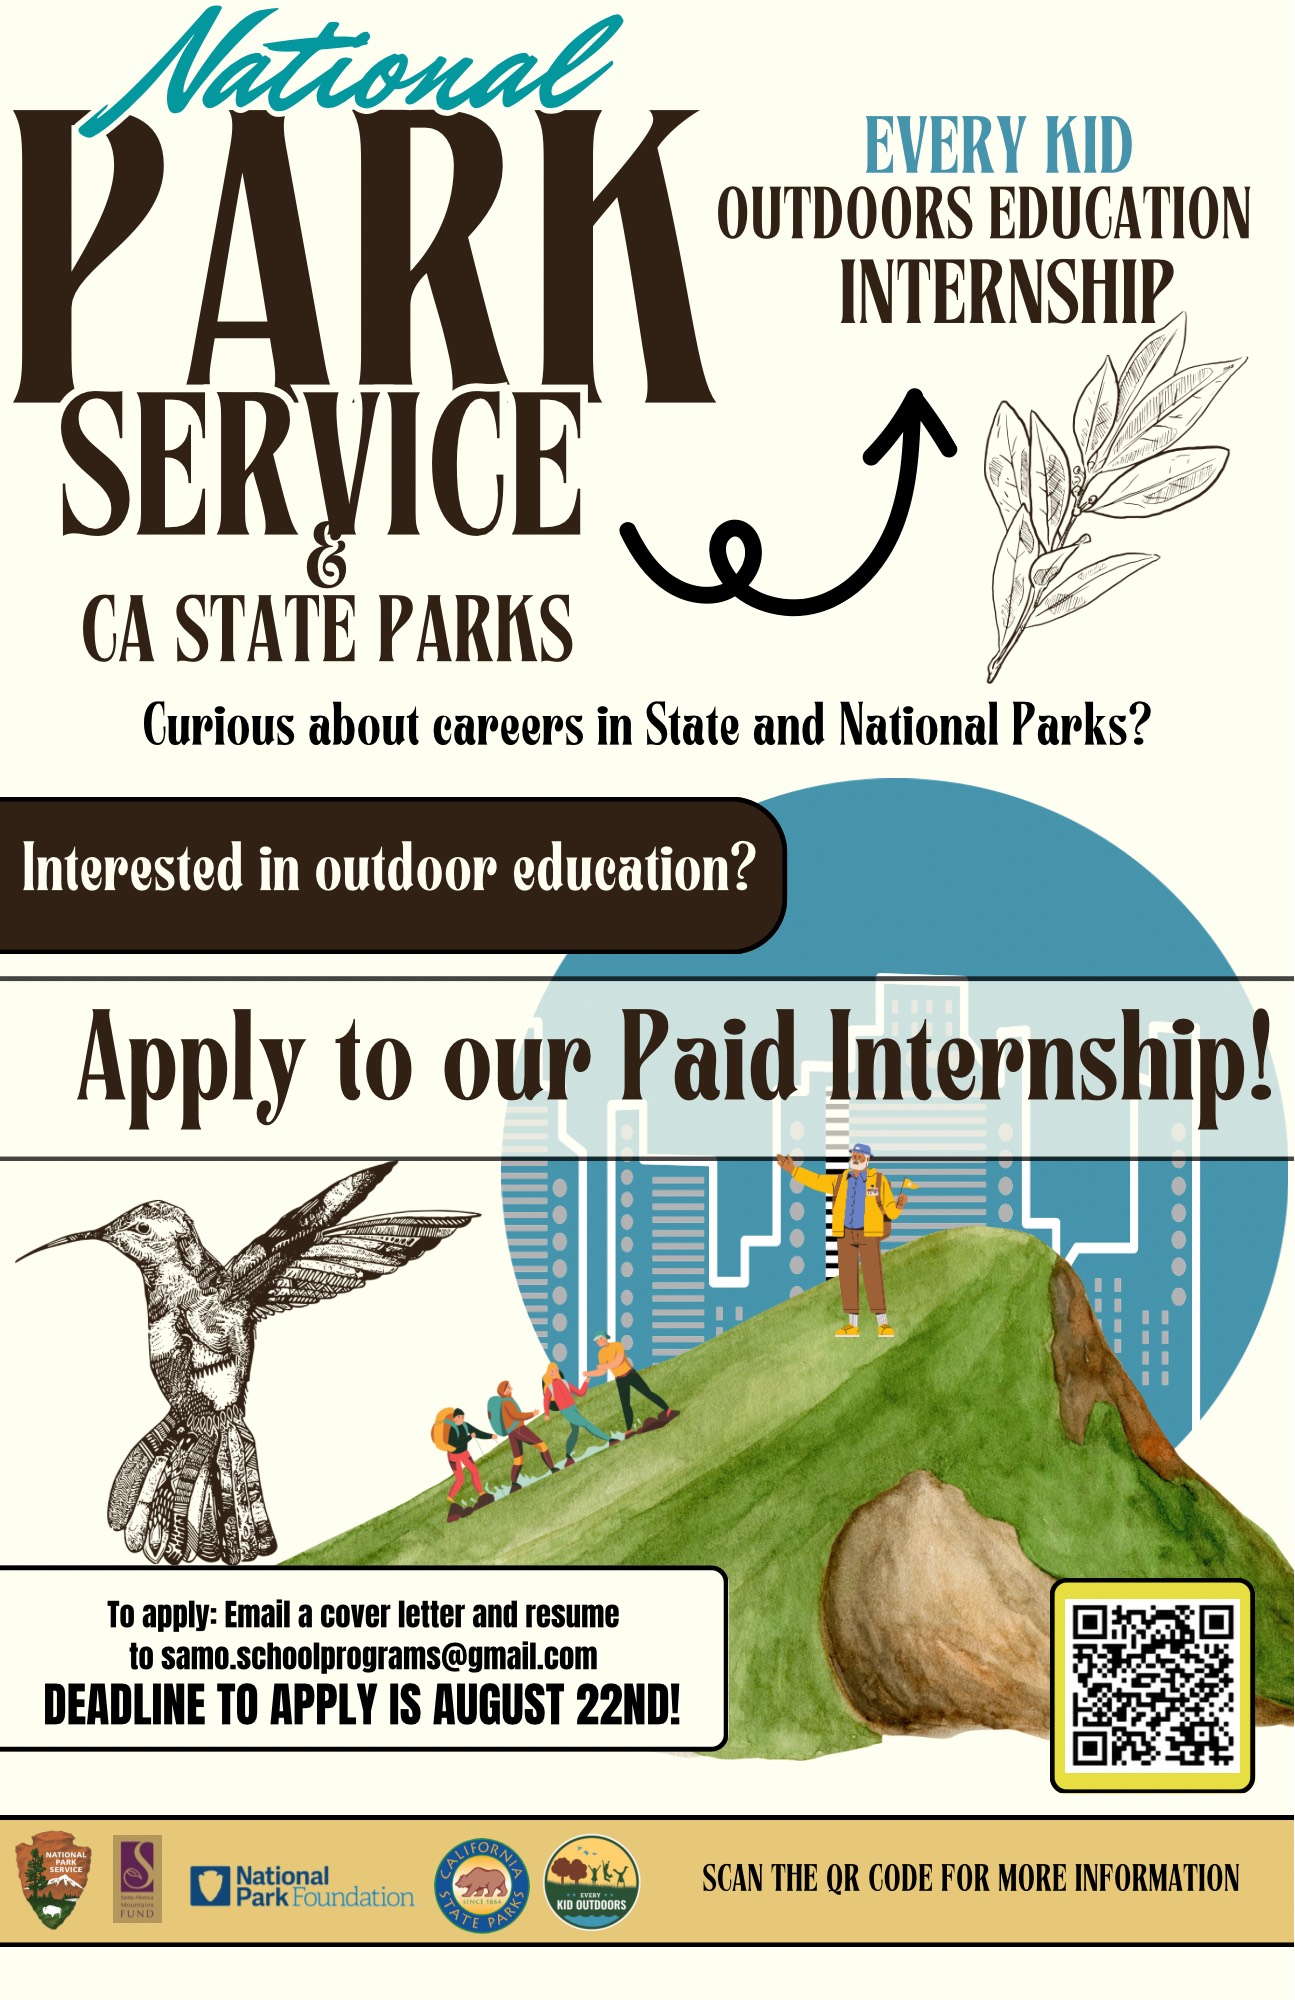 Flier with text about EKO internship, images include line drawing of plant, hummingbird and person leading a group of kids on a hike up a hill with Los Angeles in the background.